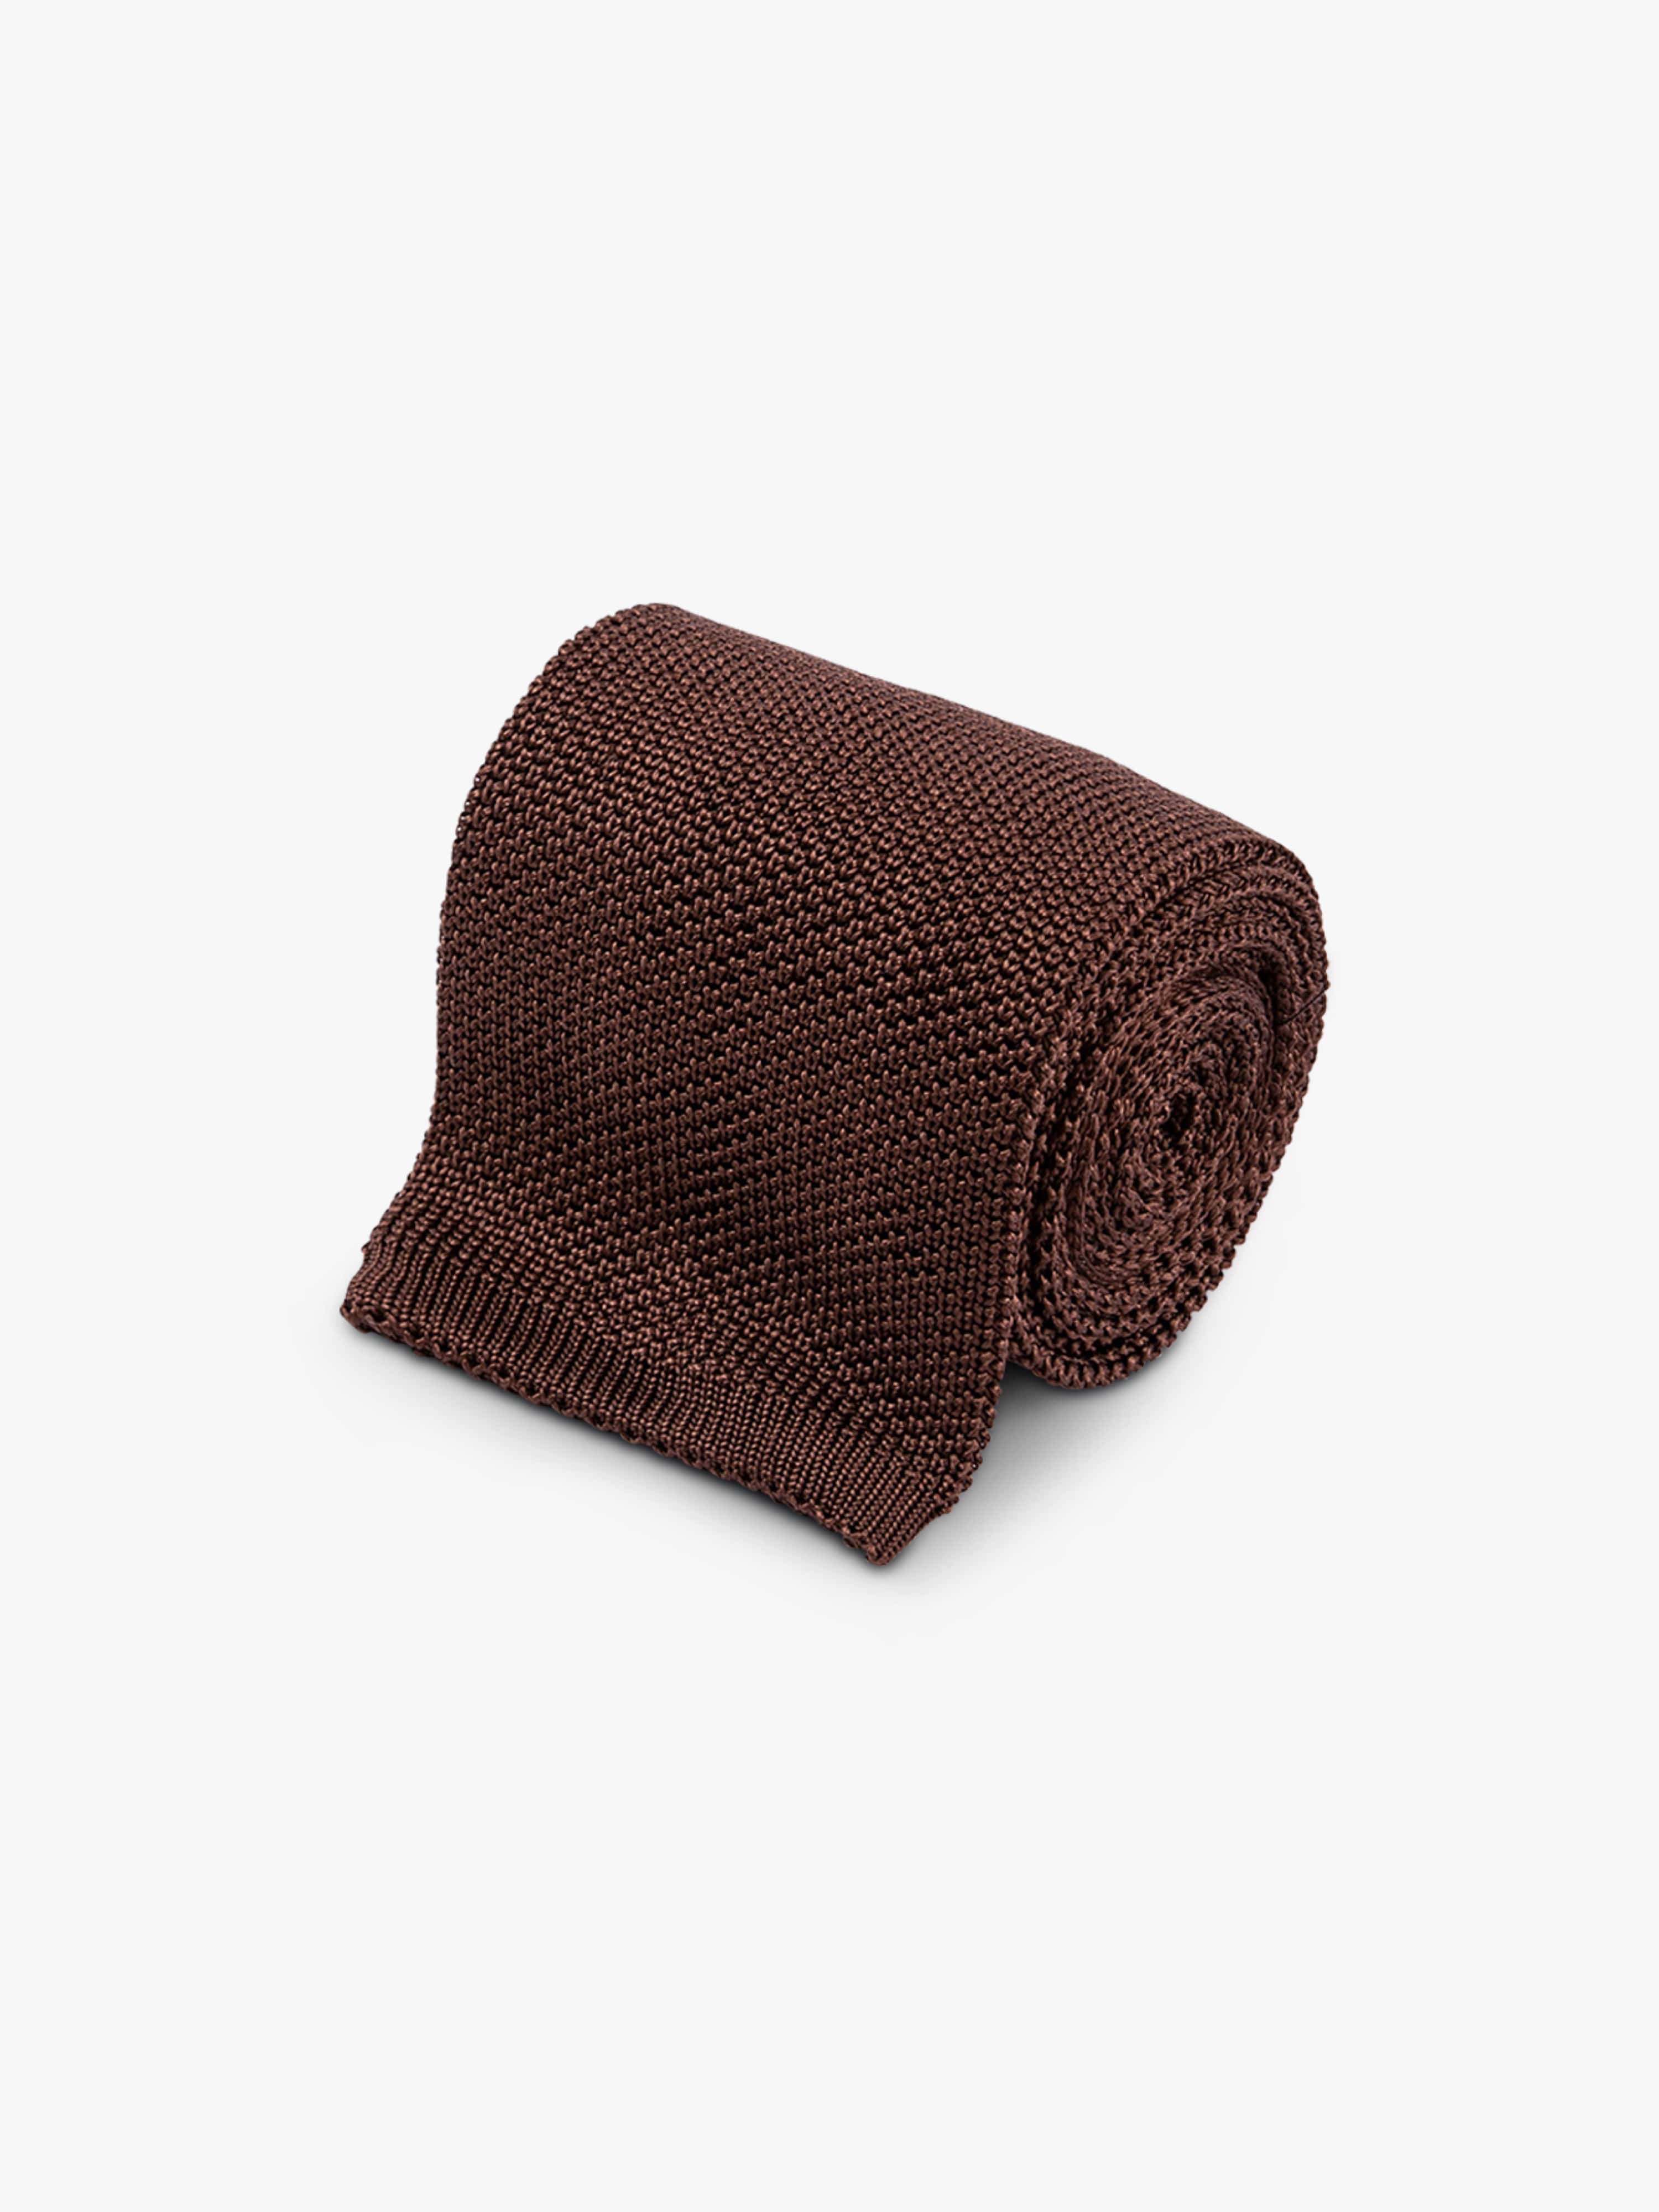 Brown Knitted Tie - Grand Le Mar